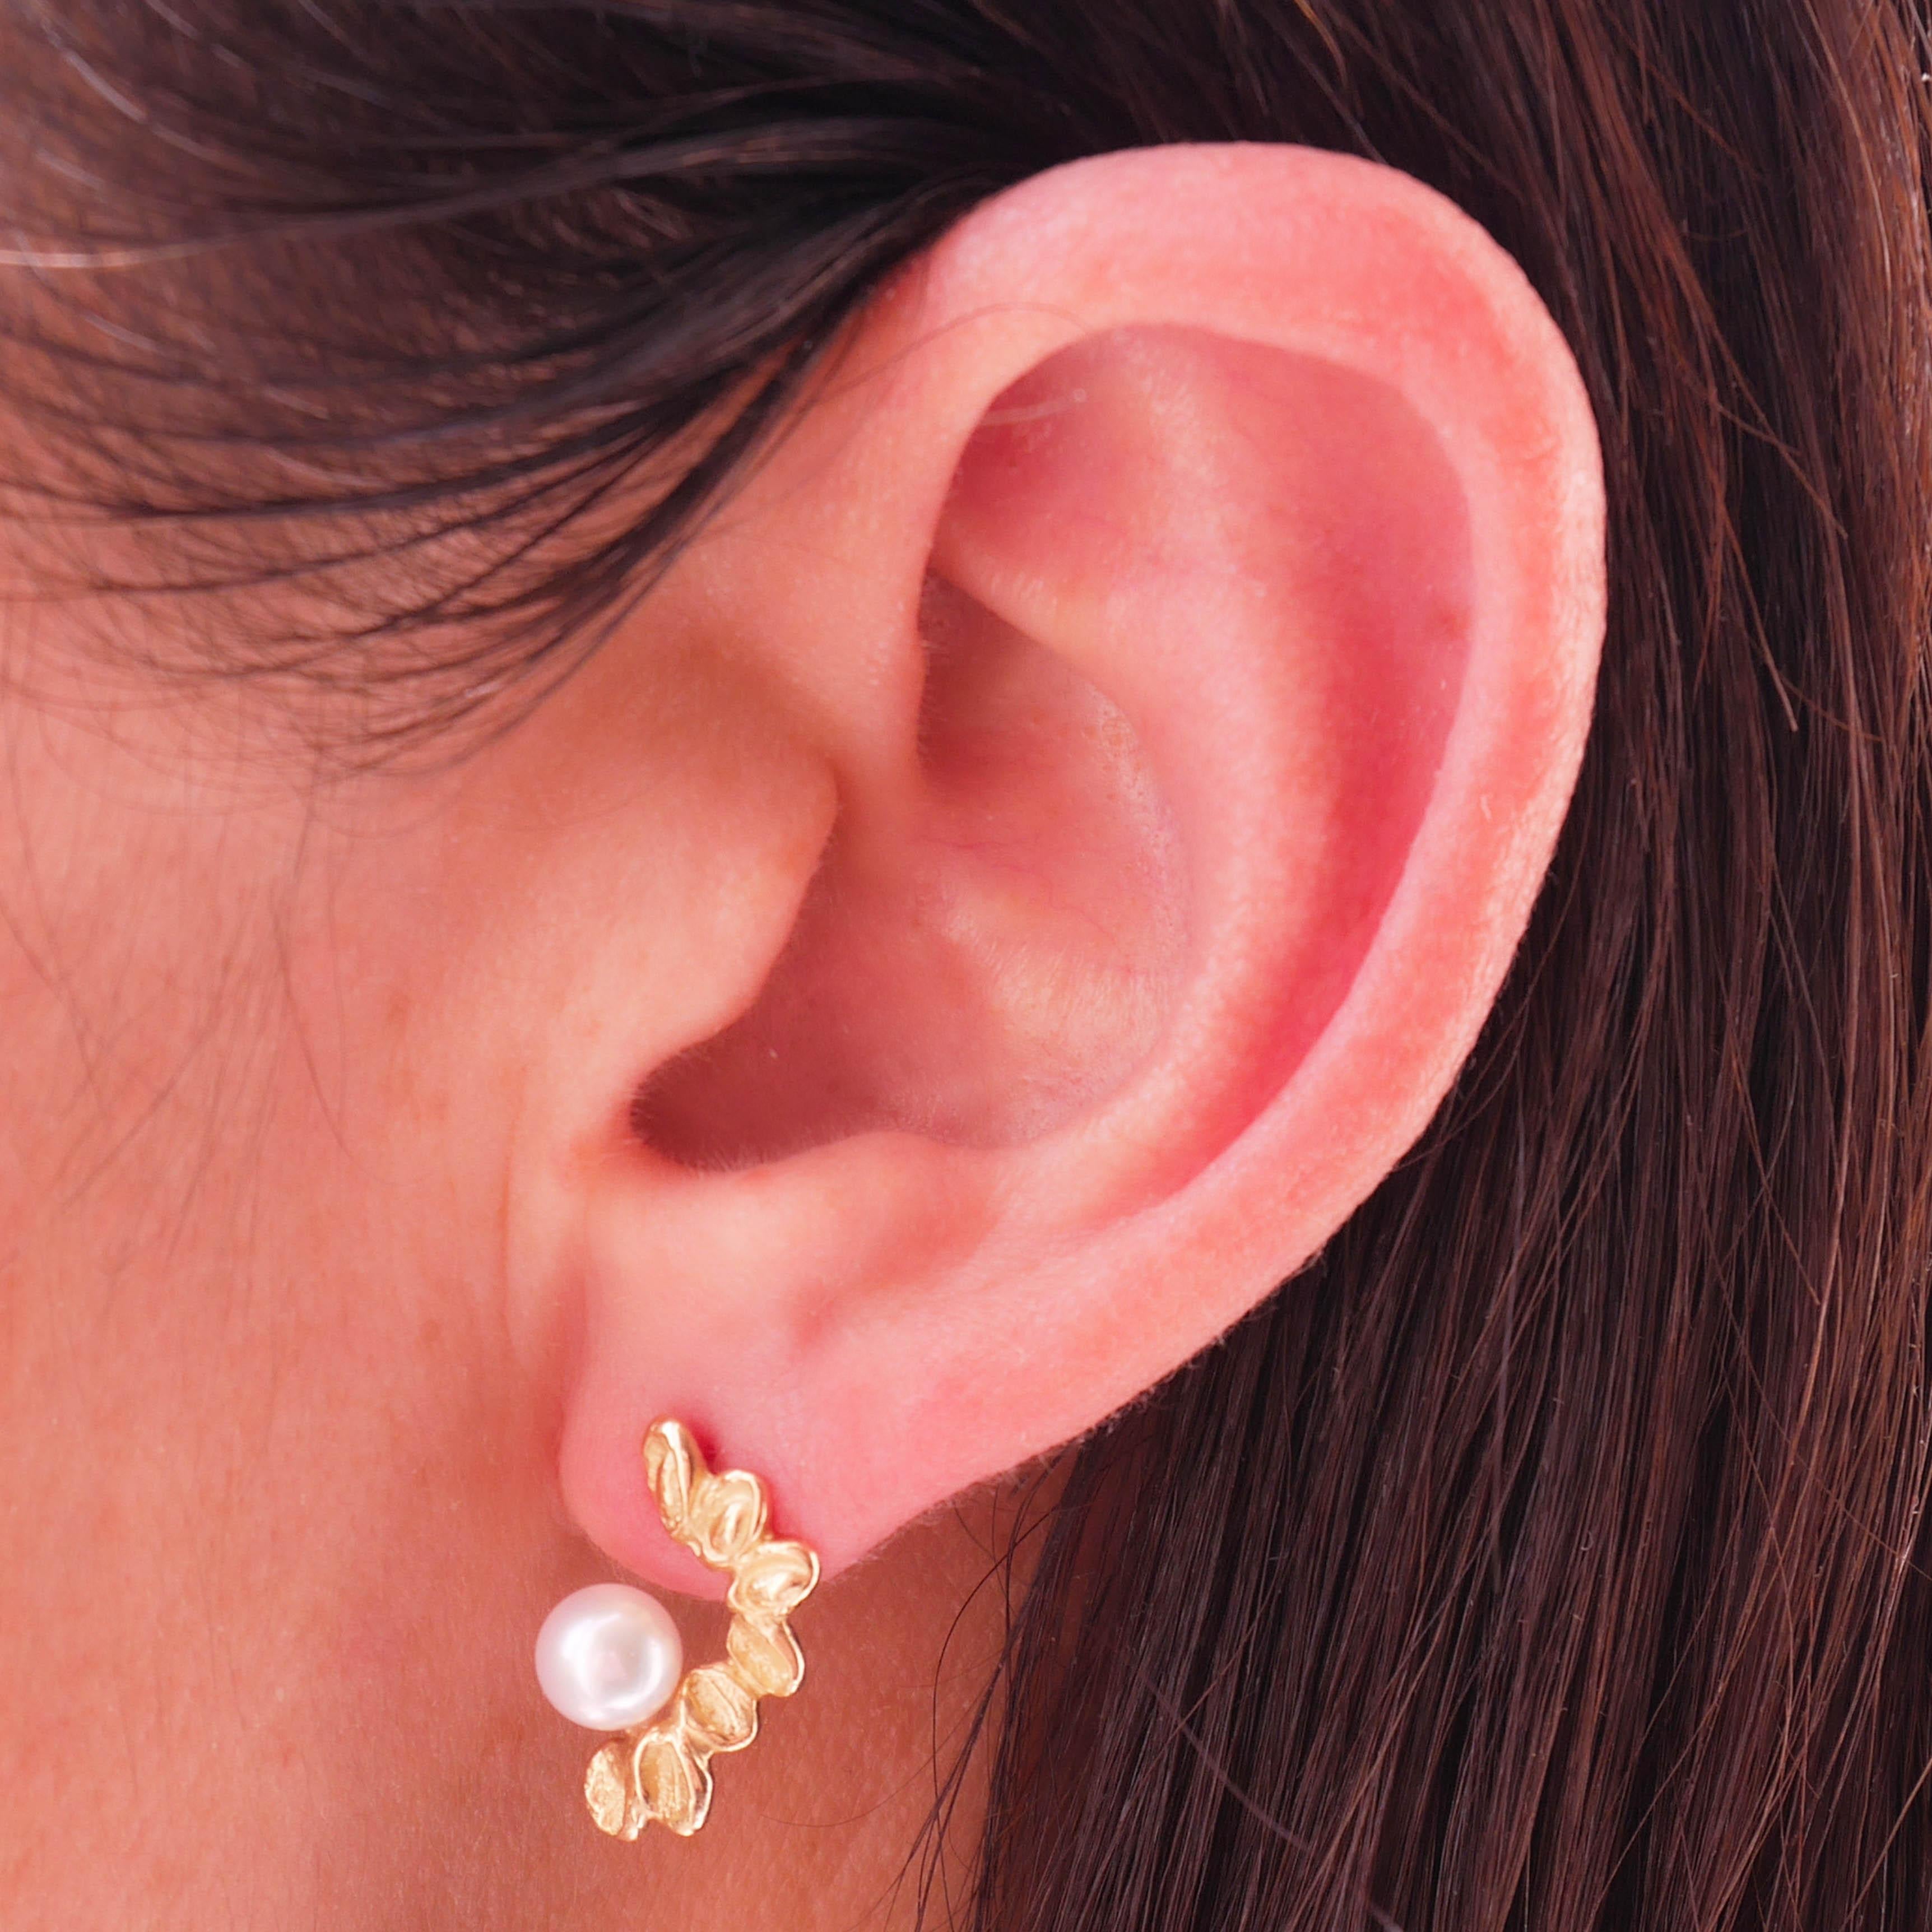 Using a modern approach to pearls, these Akoya pearl earrings handcrafted from 18 karat yellow gold weighs app. 3,5grm. 
The earrings are each set with a lustrous Akoya pearl, each leaf has been hand-engraved by using time-honored techniques.